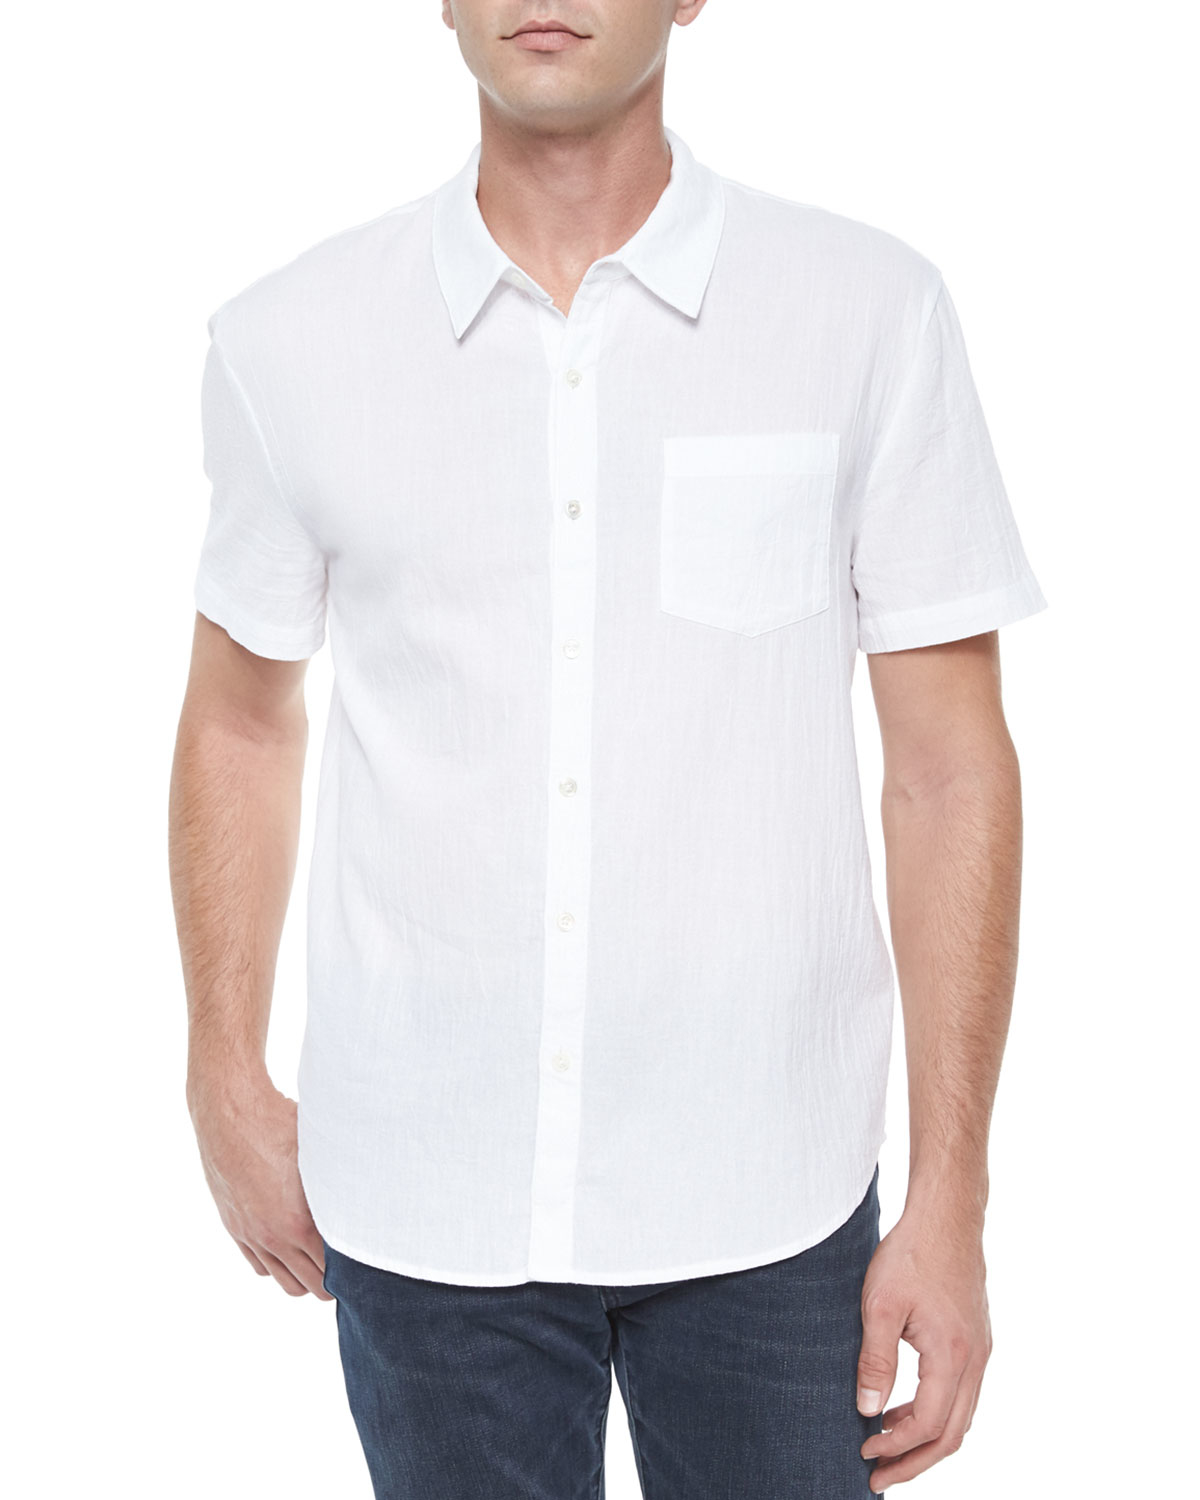 Lyst - James Perse Short-sleeve Button-down Shirt in White for Men